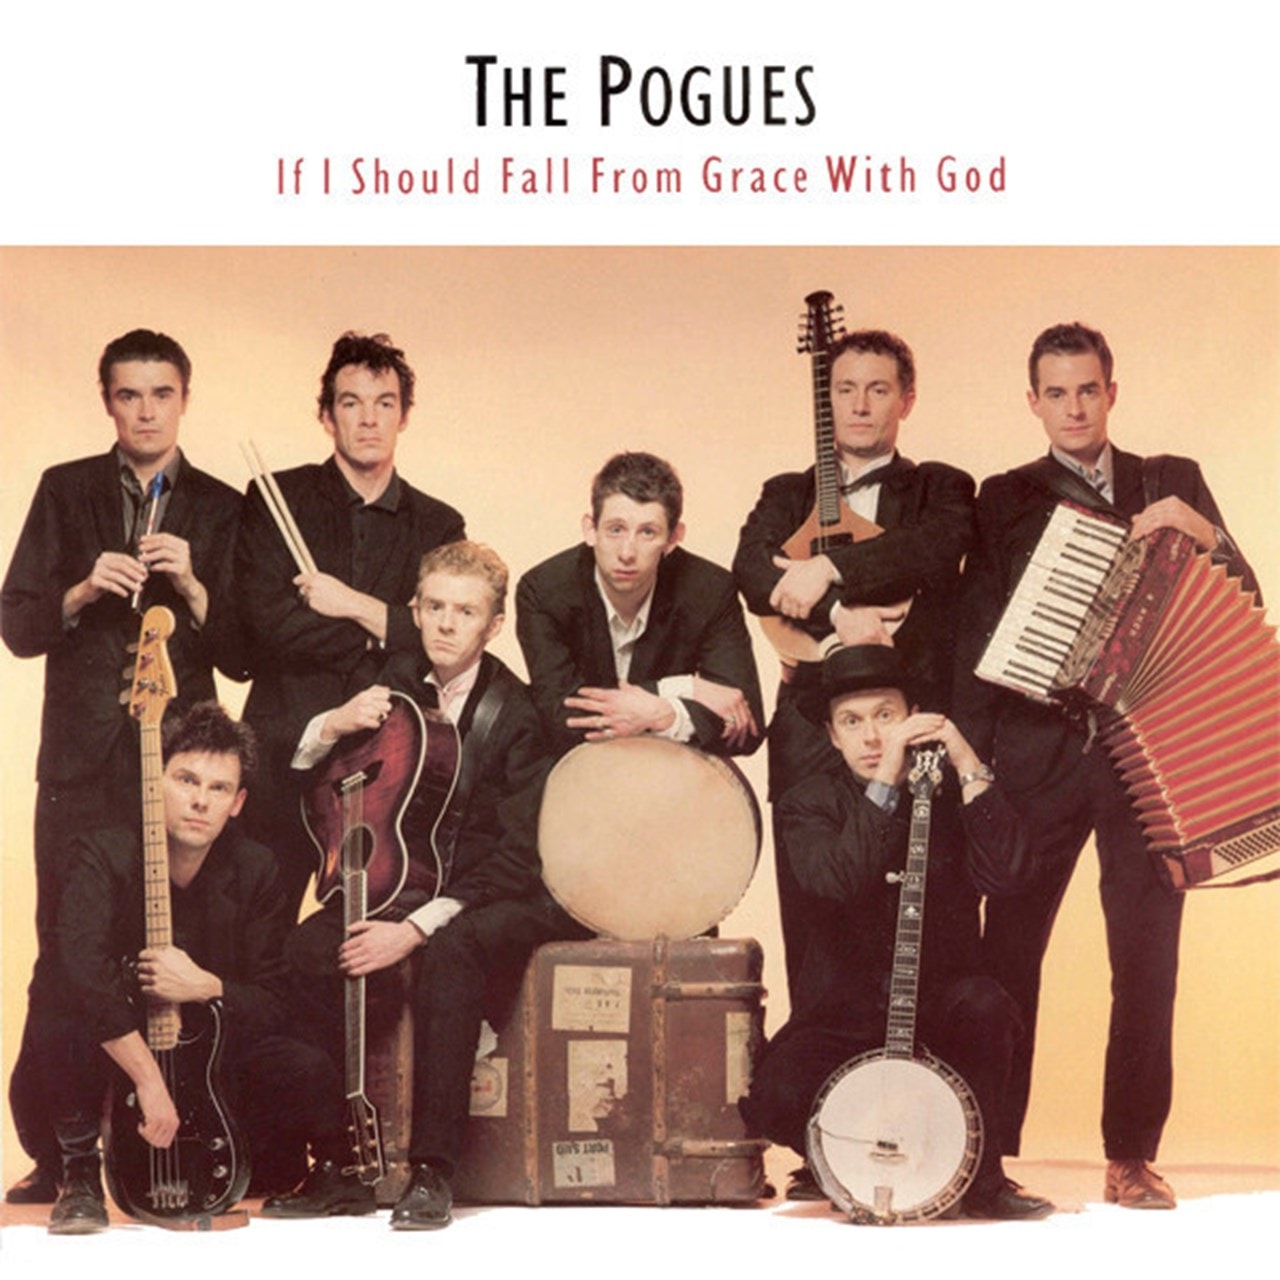 THE POGUES - If I Should Fall From Grace With God - LP - 180g Vinyl